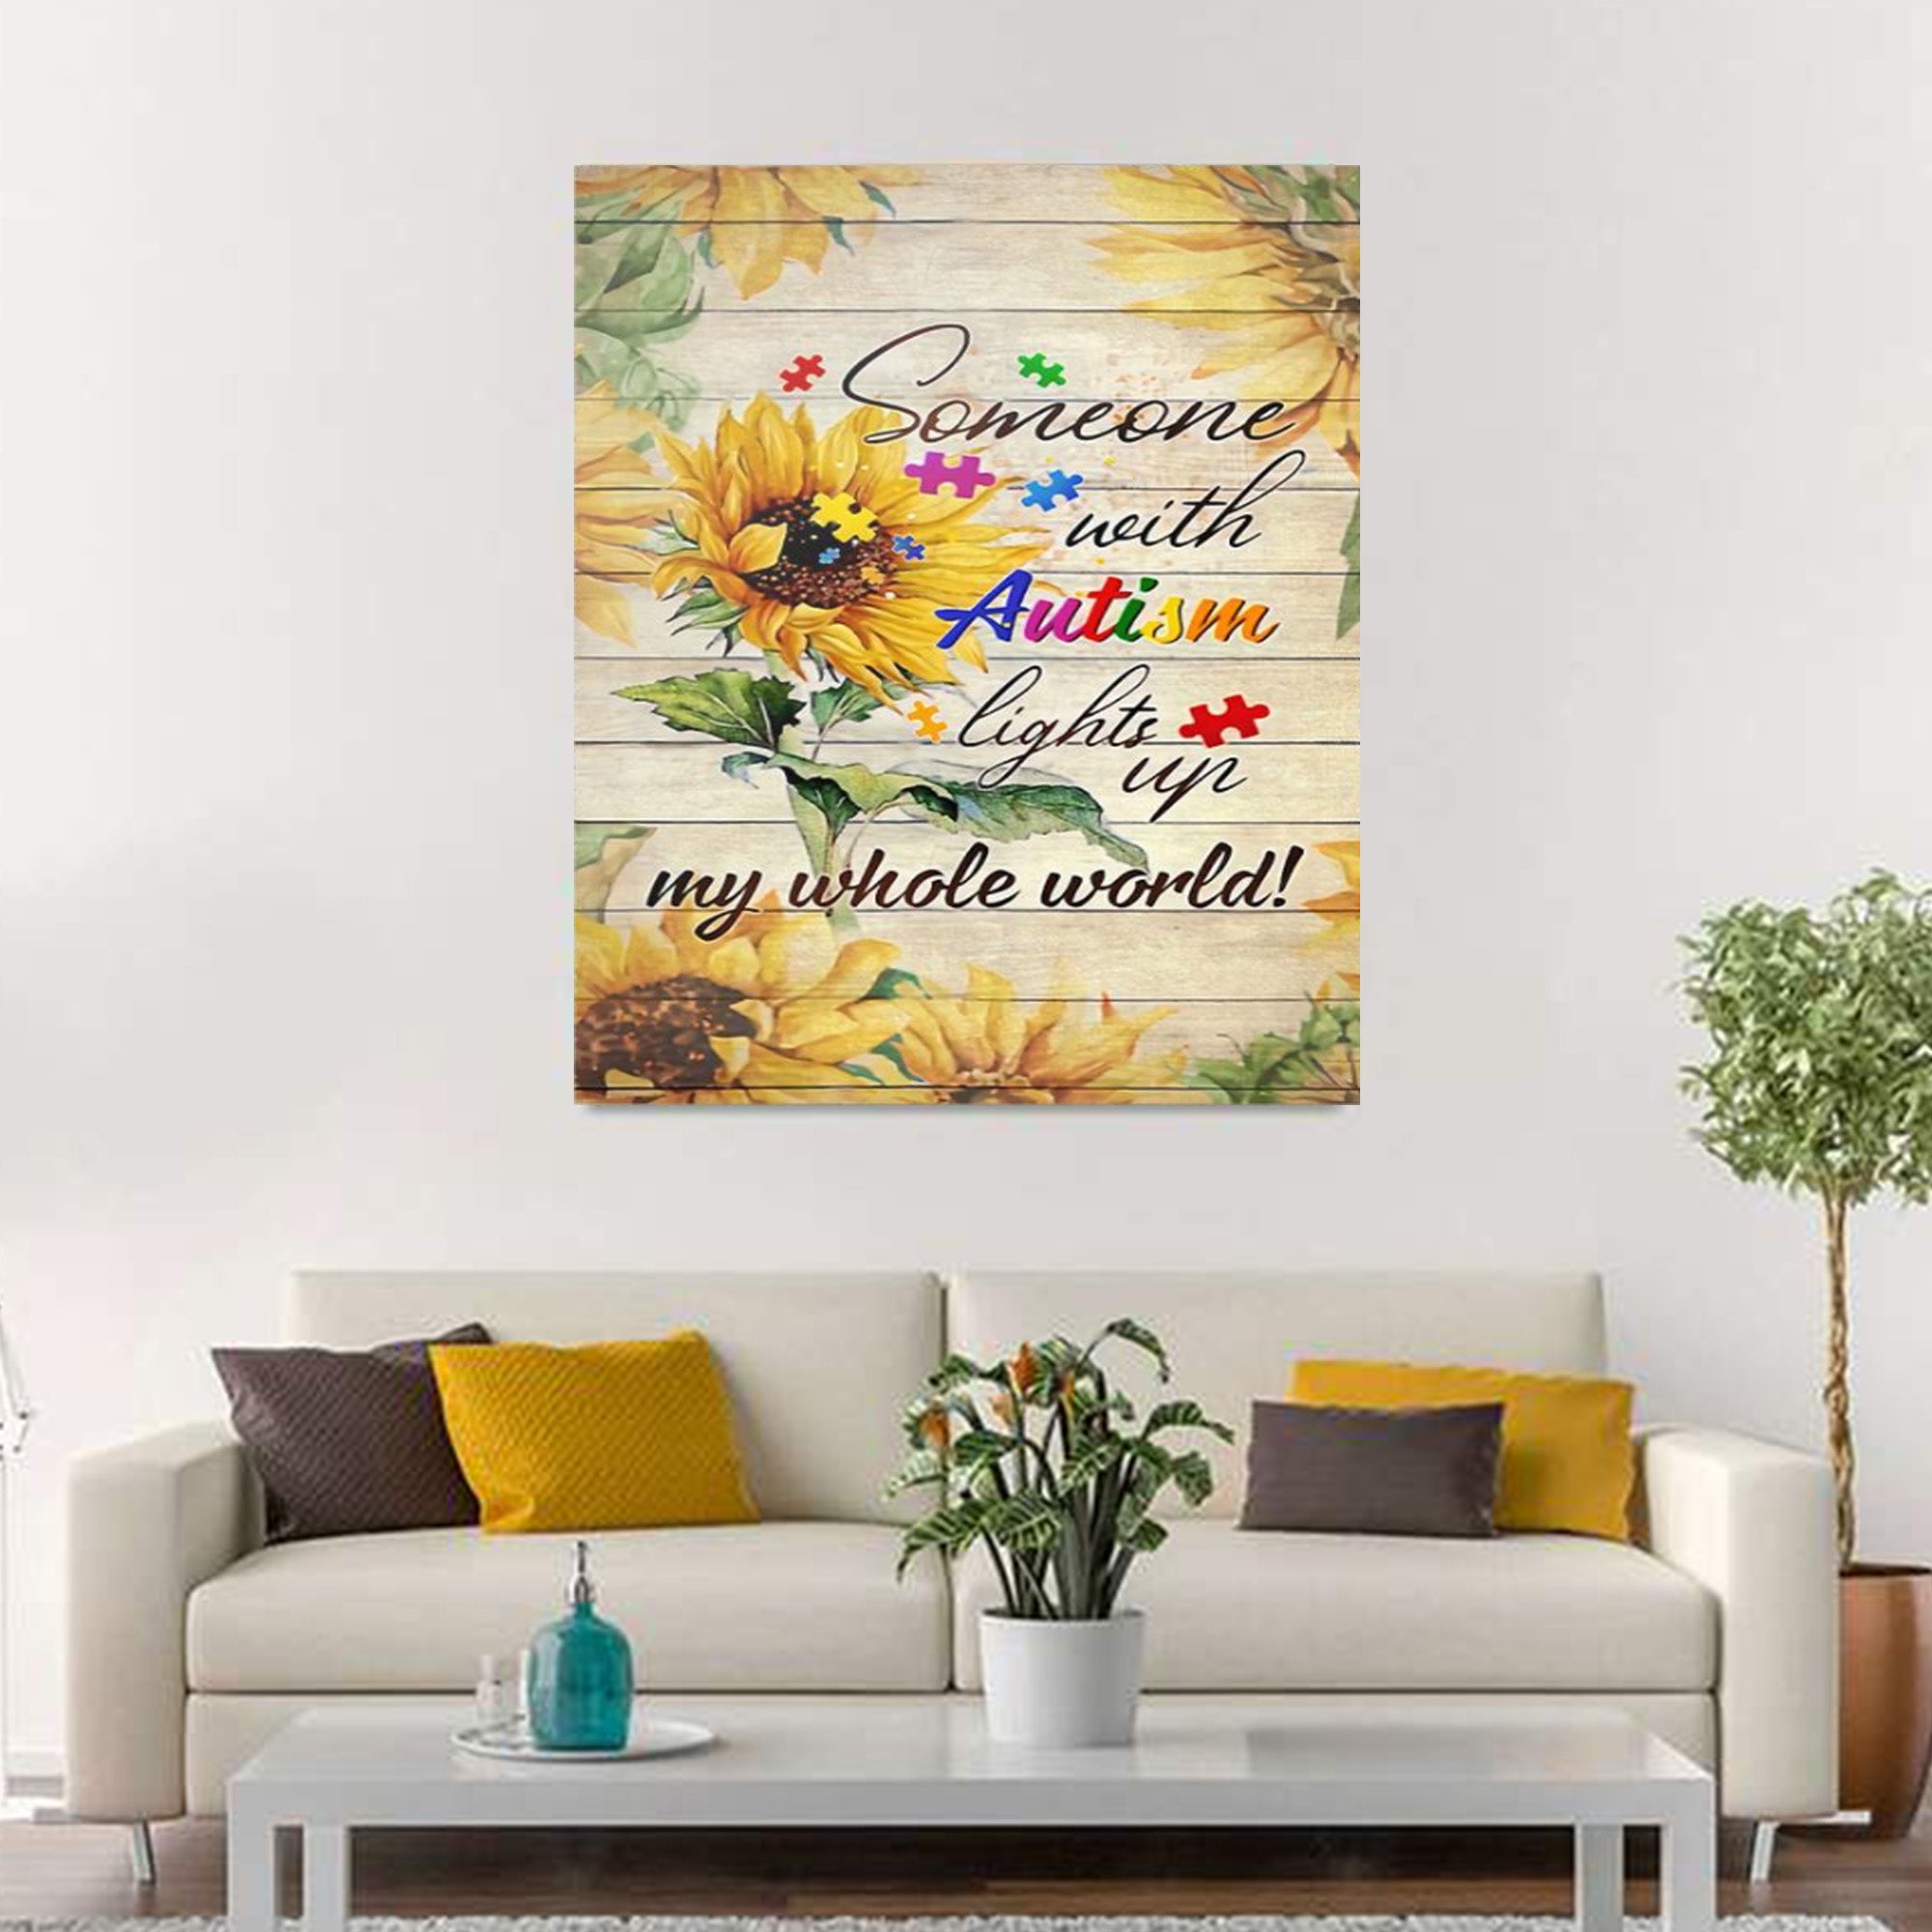 Autism Poster – Someone With Autism Lights Up My Whole World!